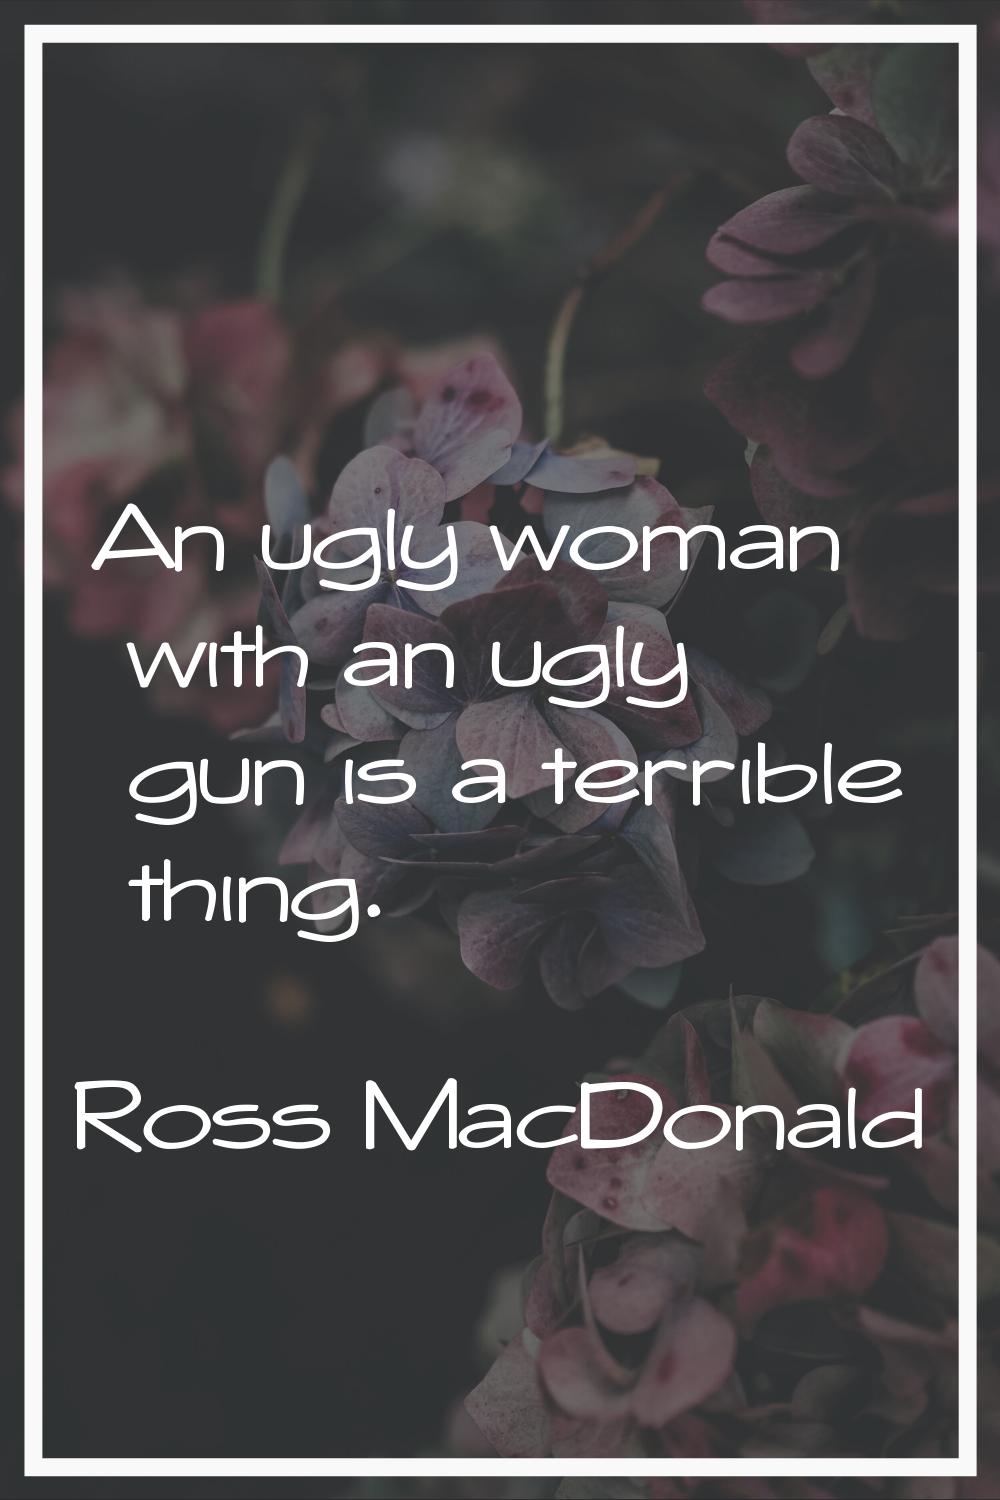 An ugly woman with an ugly gun is a terrible thing.